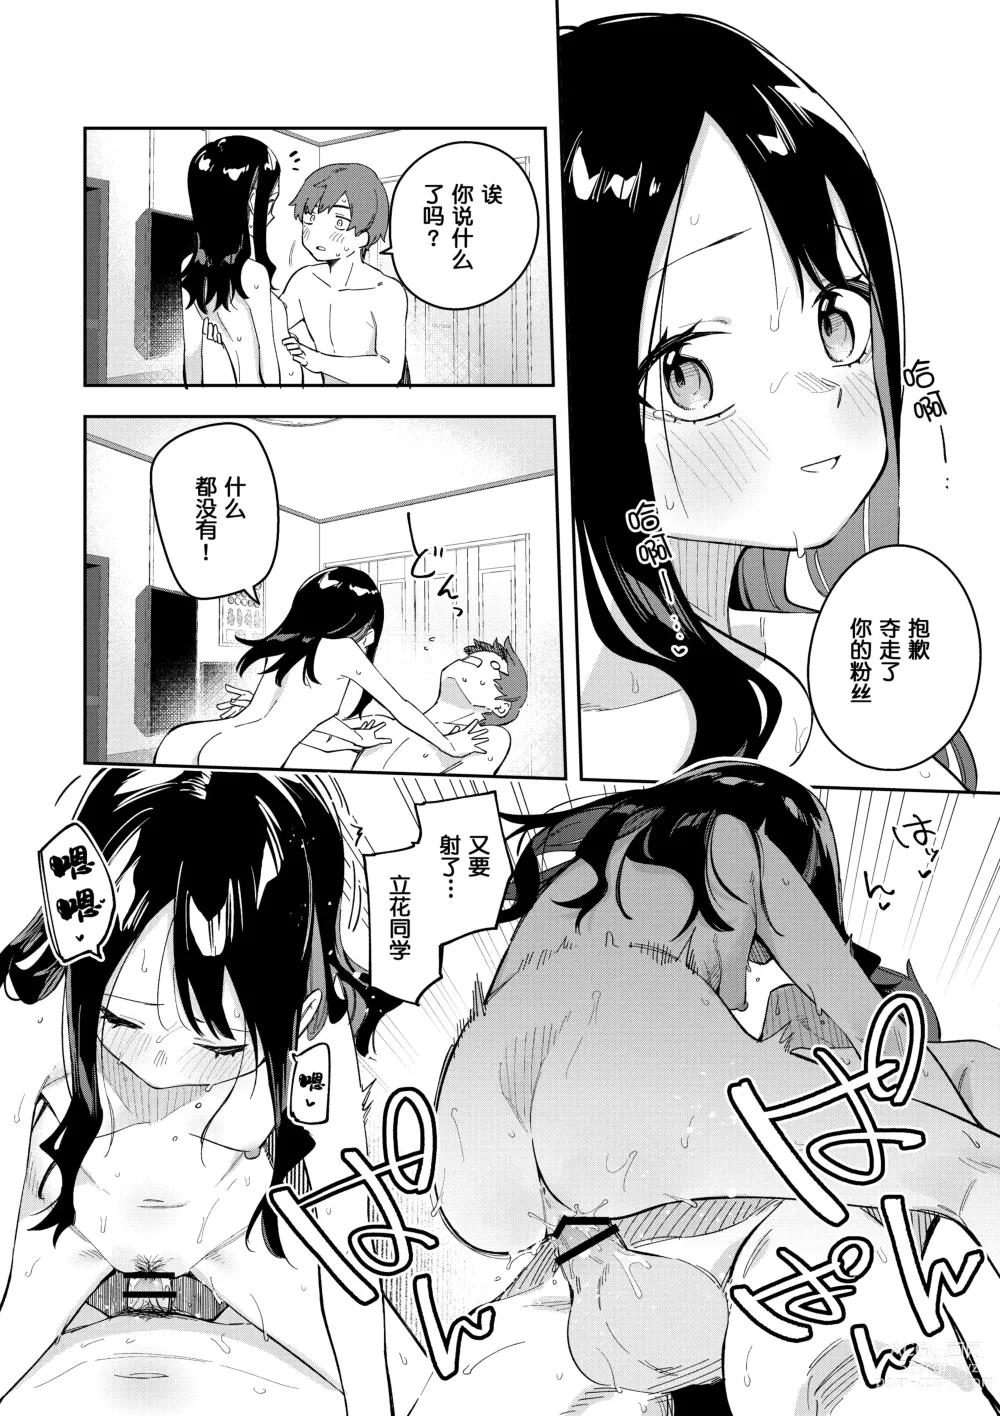 Page 38 of doujinshi 隣人は有名配信者3人目